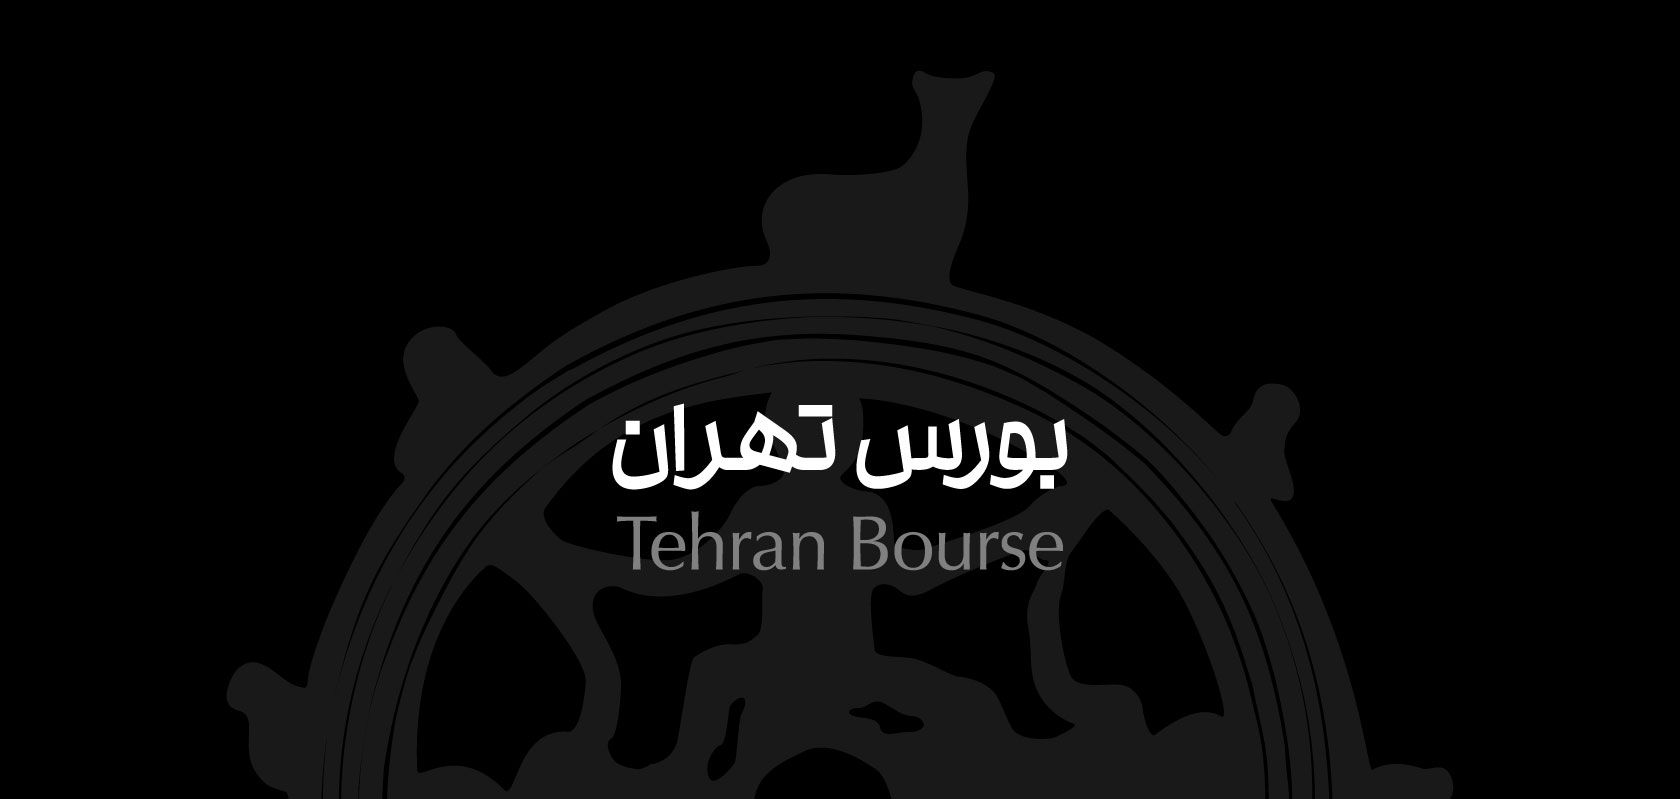 Projects.-Bourse-Tehran-06.15-Mo-1